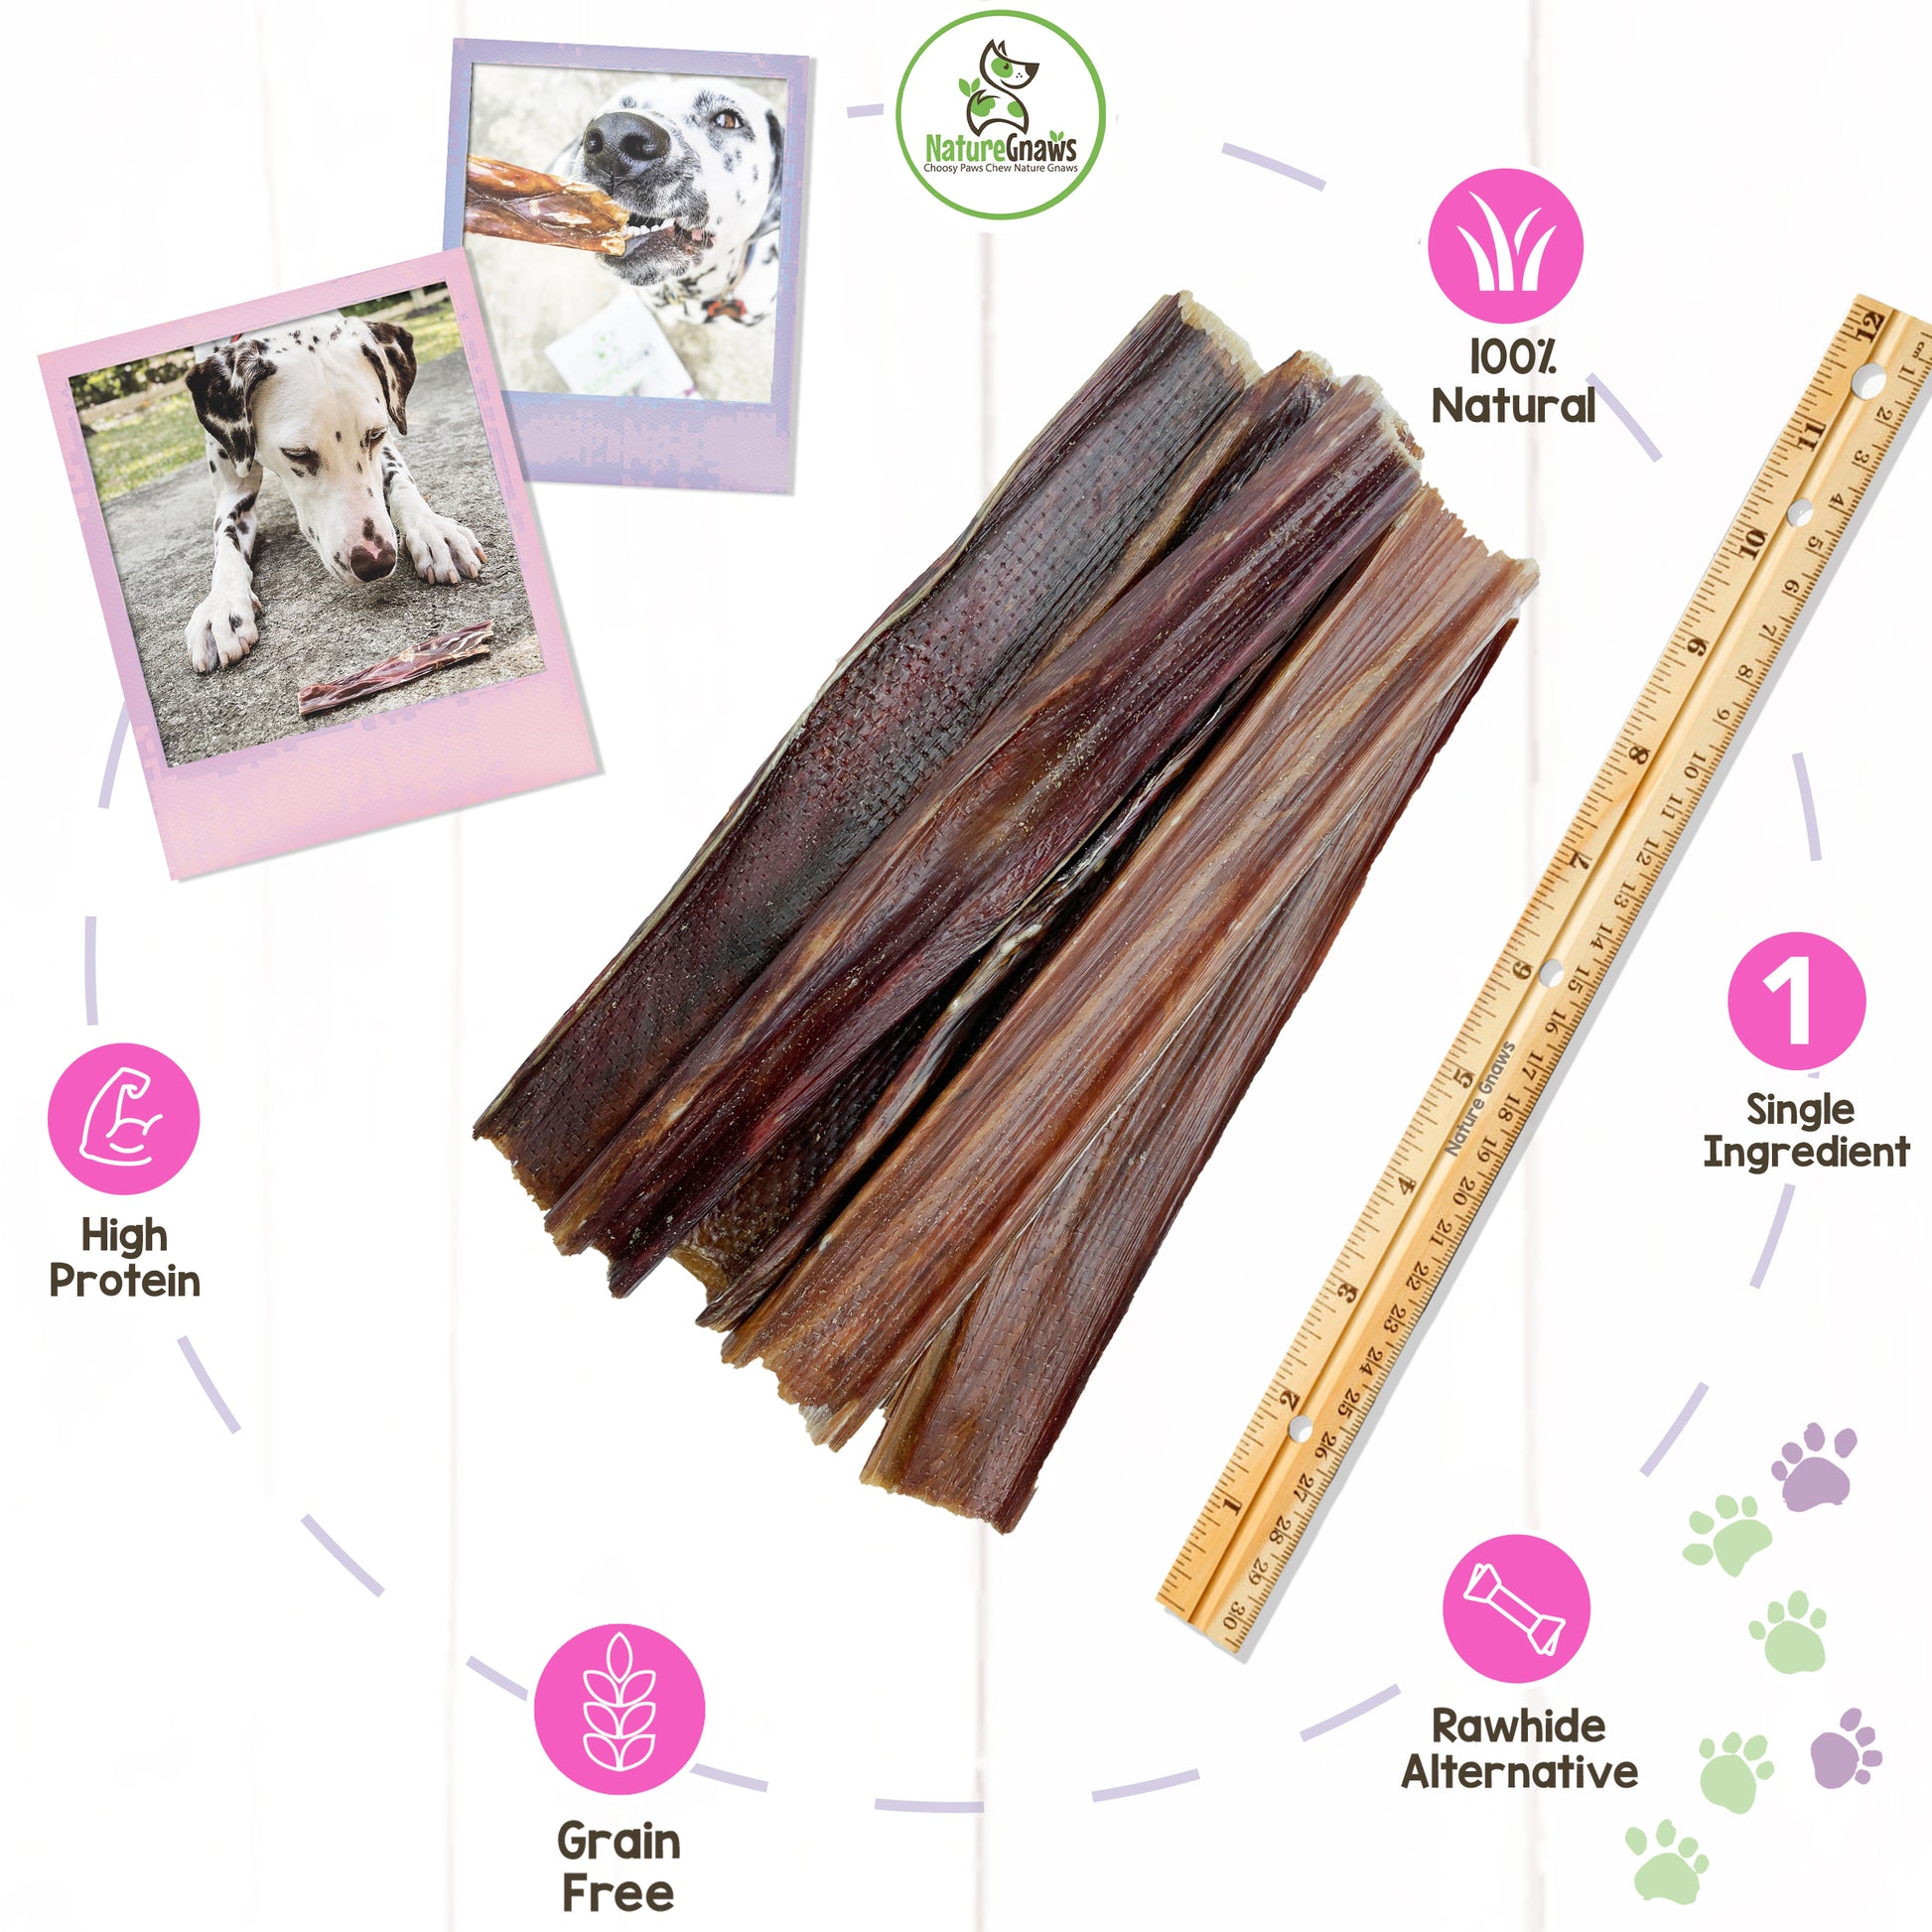 pile of large beef jerky chews with ruler next to it for perspective and pink benefits icons. 2 polaroid images f dogs with jerky chews.